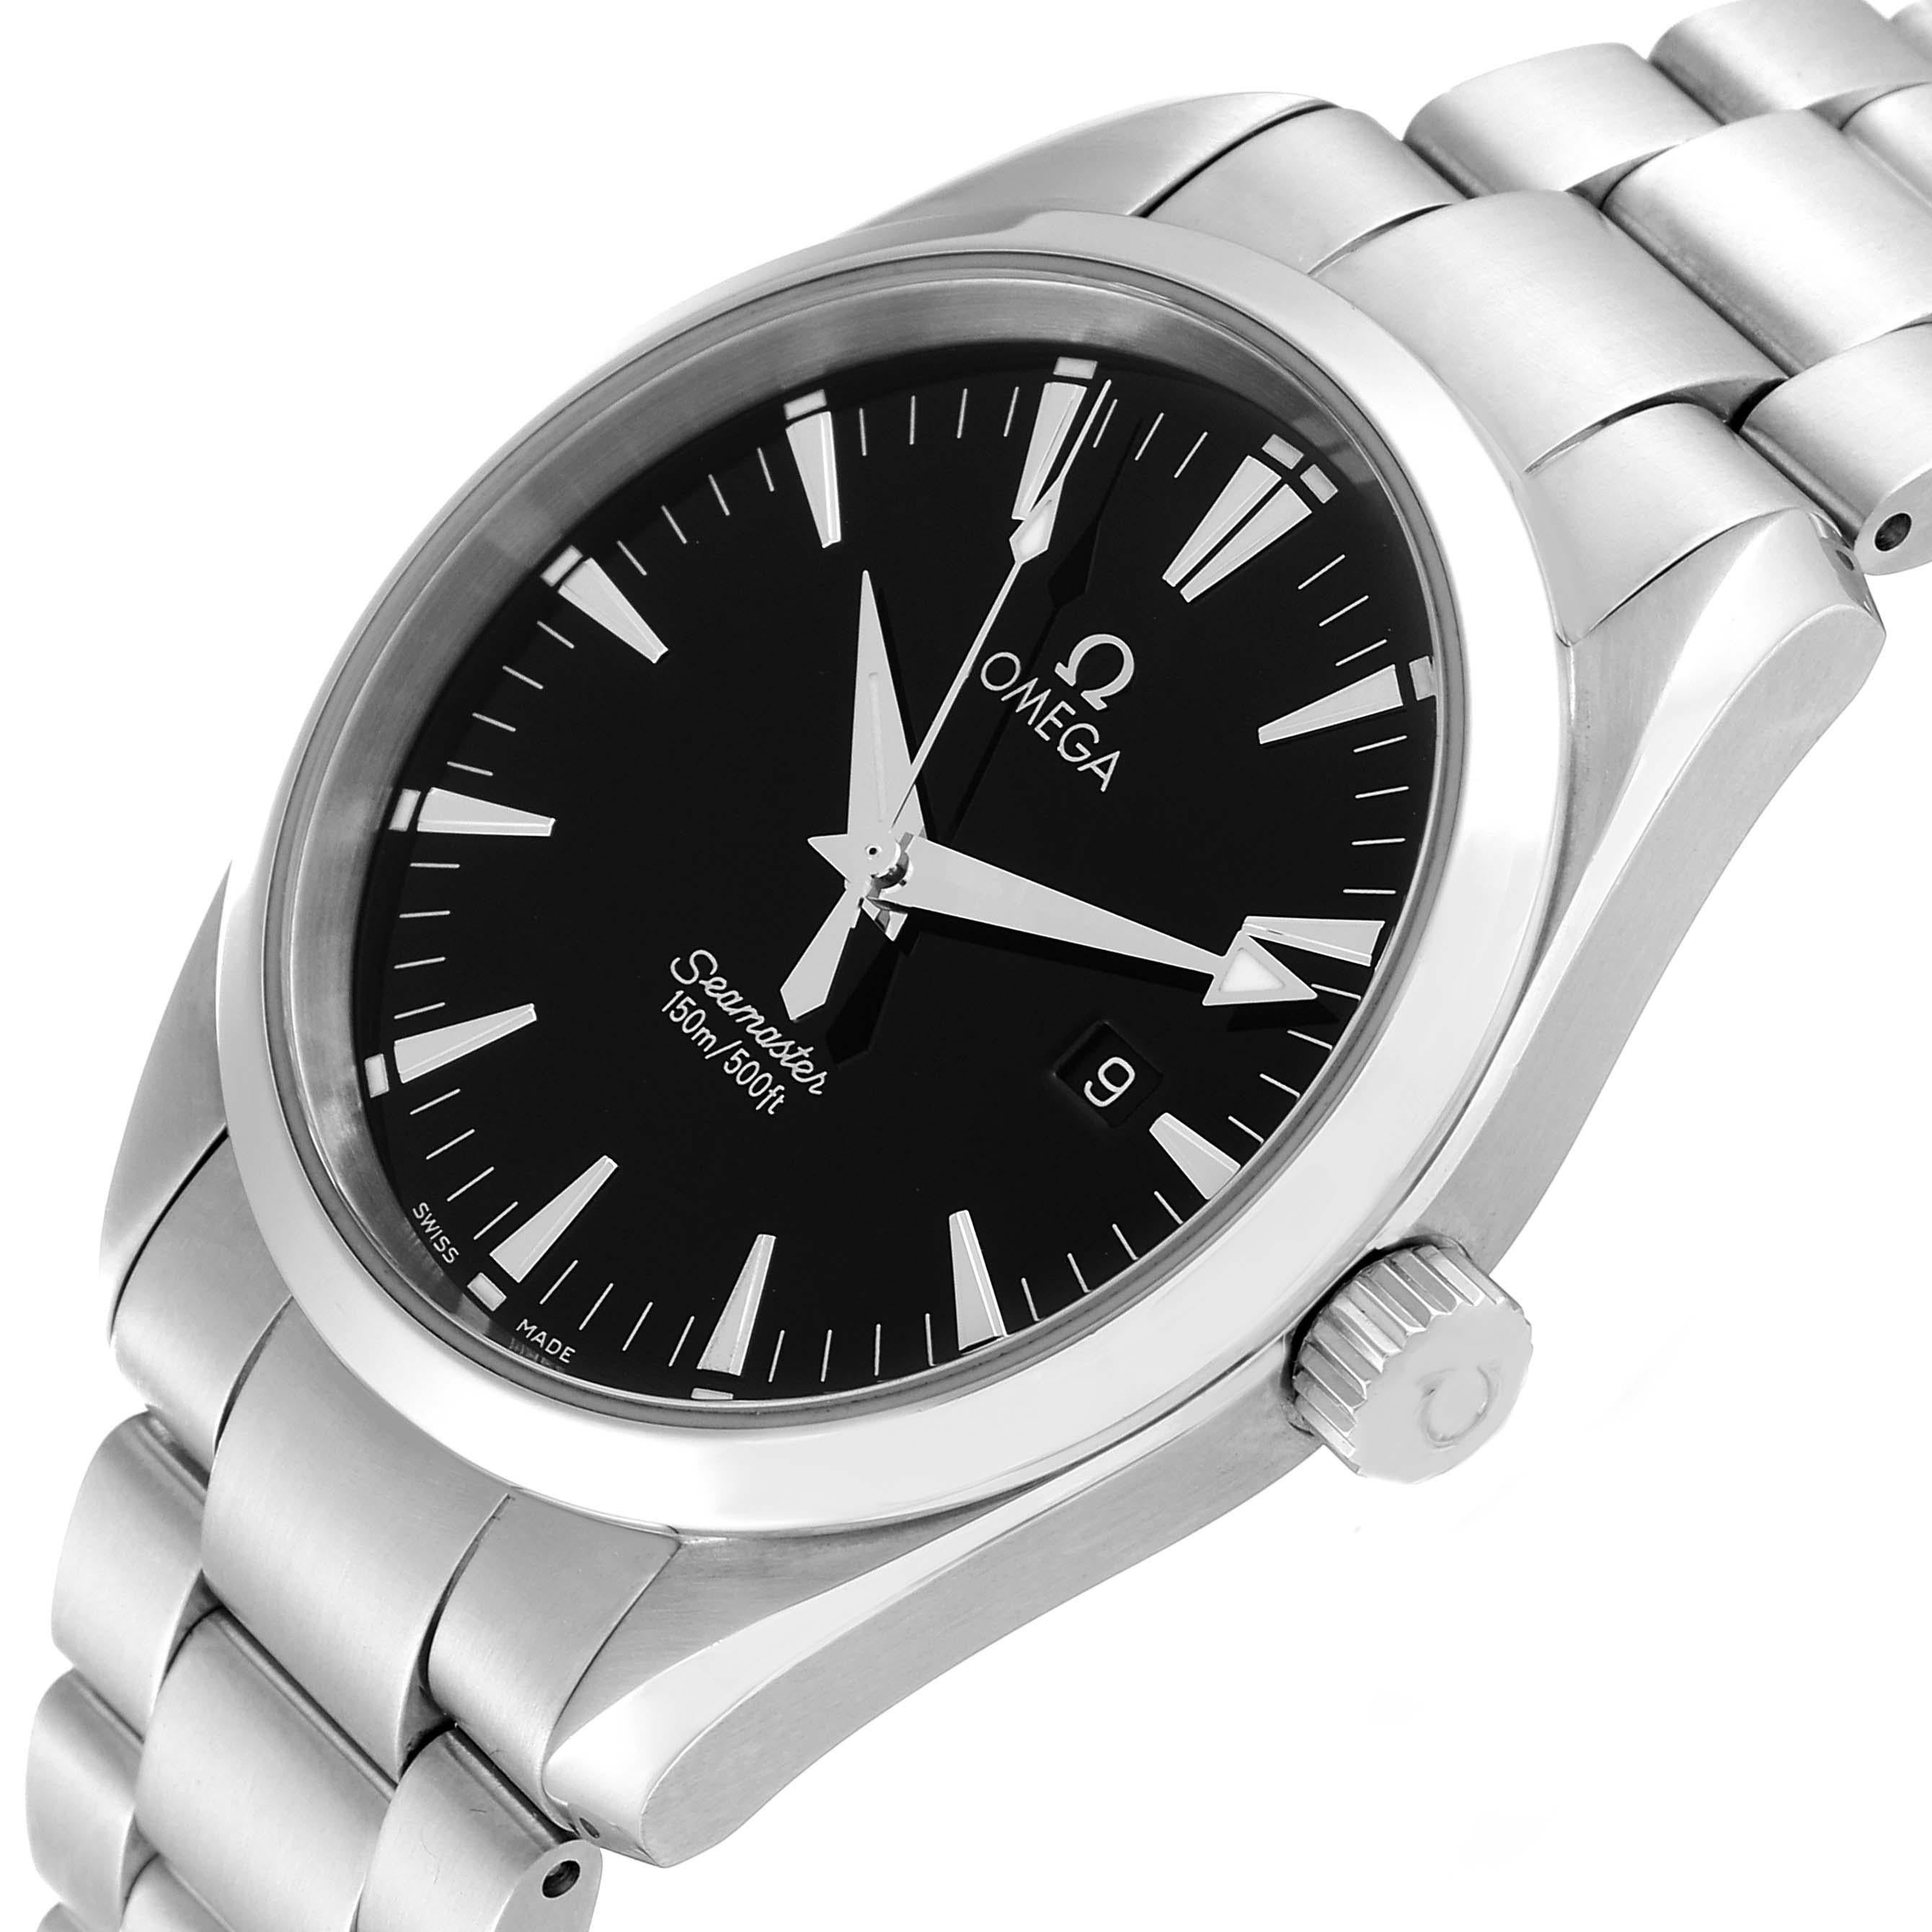 Omega Seamaster Aqua Terra Black Dial Steel Mens Watch 2517.50.00 Card. Quartz movement. Stainless steel round case 39.2 mm in diameter. Stainless steel smooth bezel. Scratch resistant sapphire crystal. Black dial with raised stainless steel index